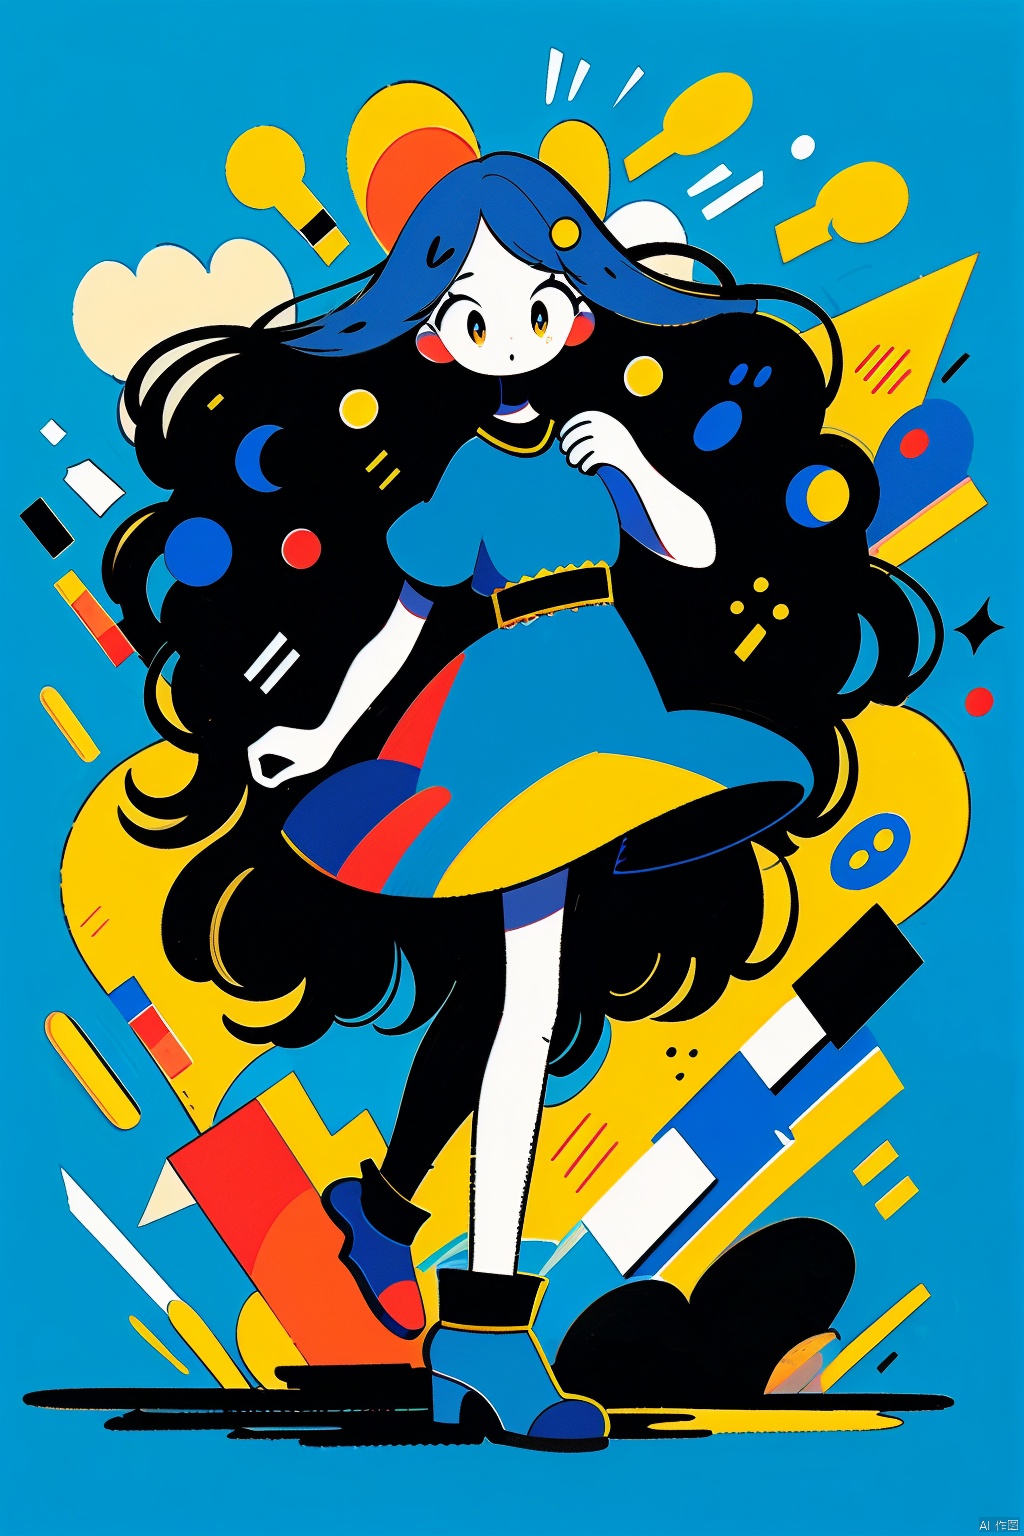 a flat illustration of a fashion girl, exaggerated pose,sapphire blue vs gold cloth and
hair,minimalist art,pure klein blue background, in the style of suprematism --s400, tuyagirl, HTTP